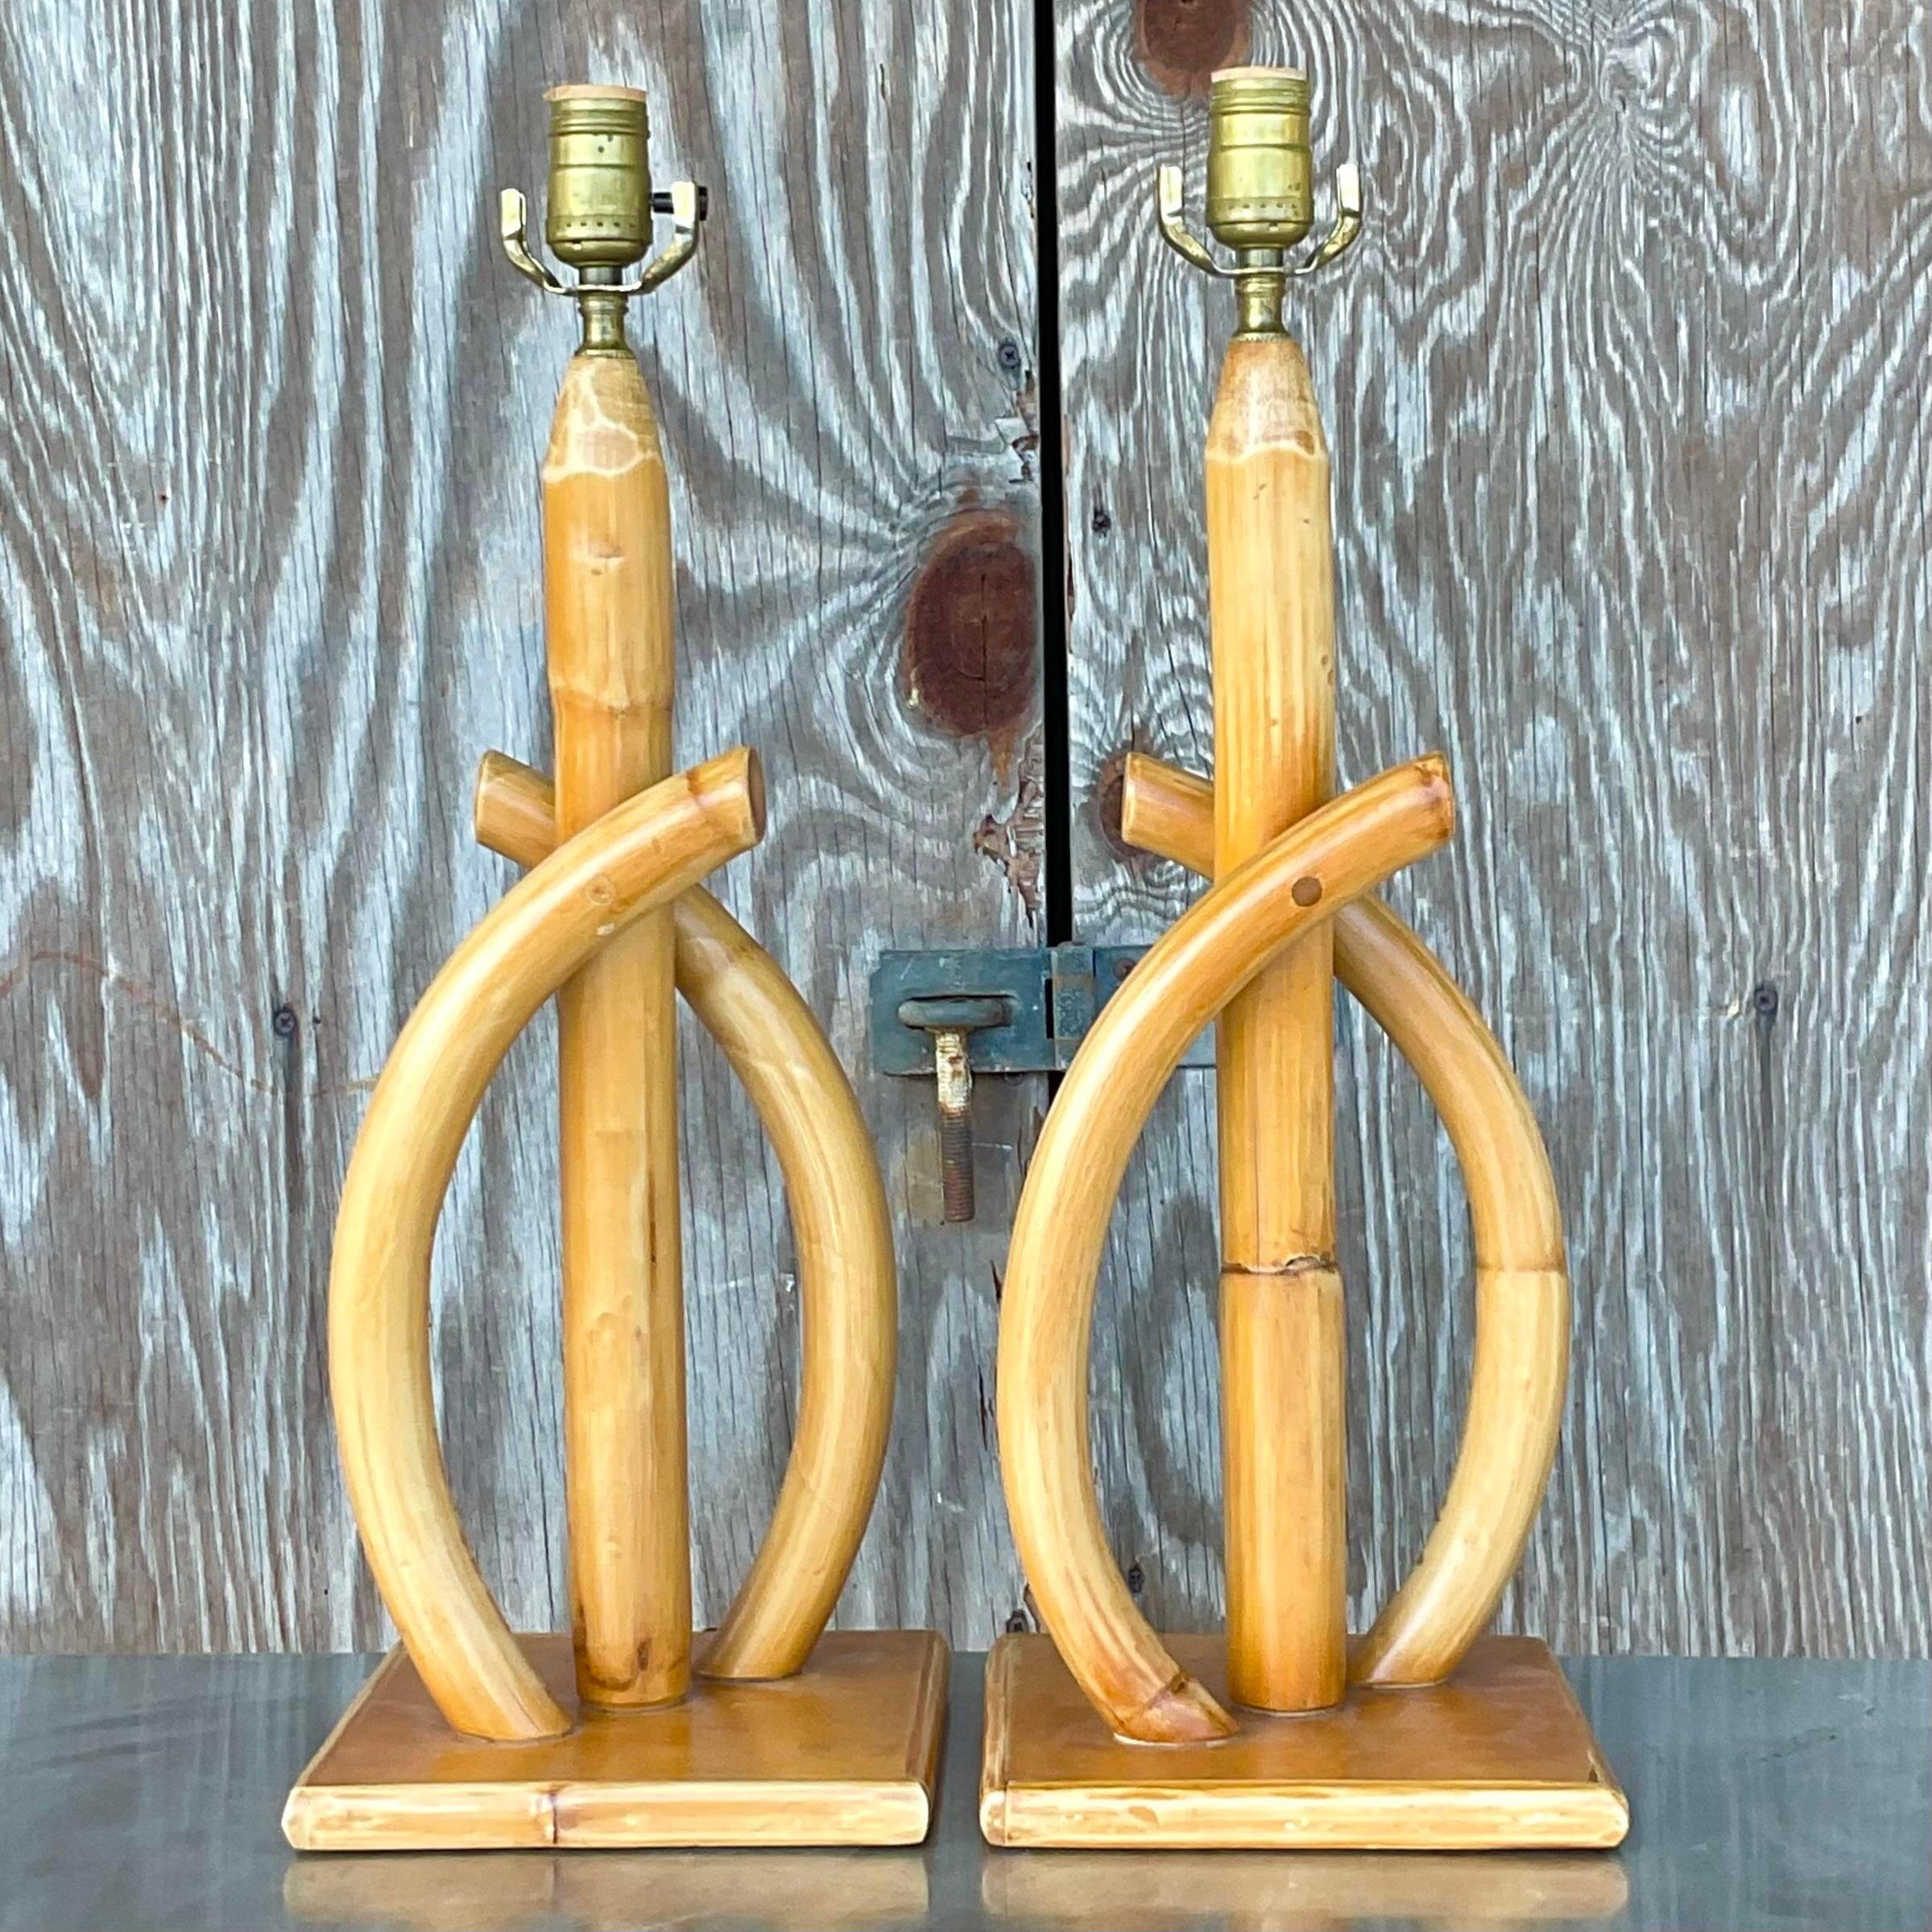 A fabulous pair of vintage Coastal table lamps. Beautiful bent rattan in a clean and modern shape. Acquired from a Palm Beach estate.